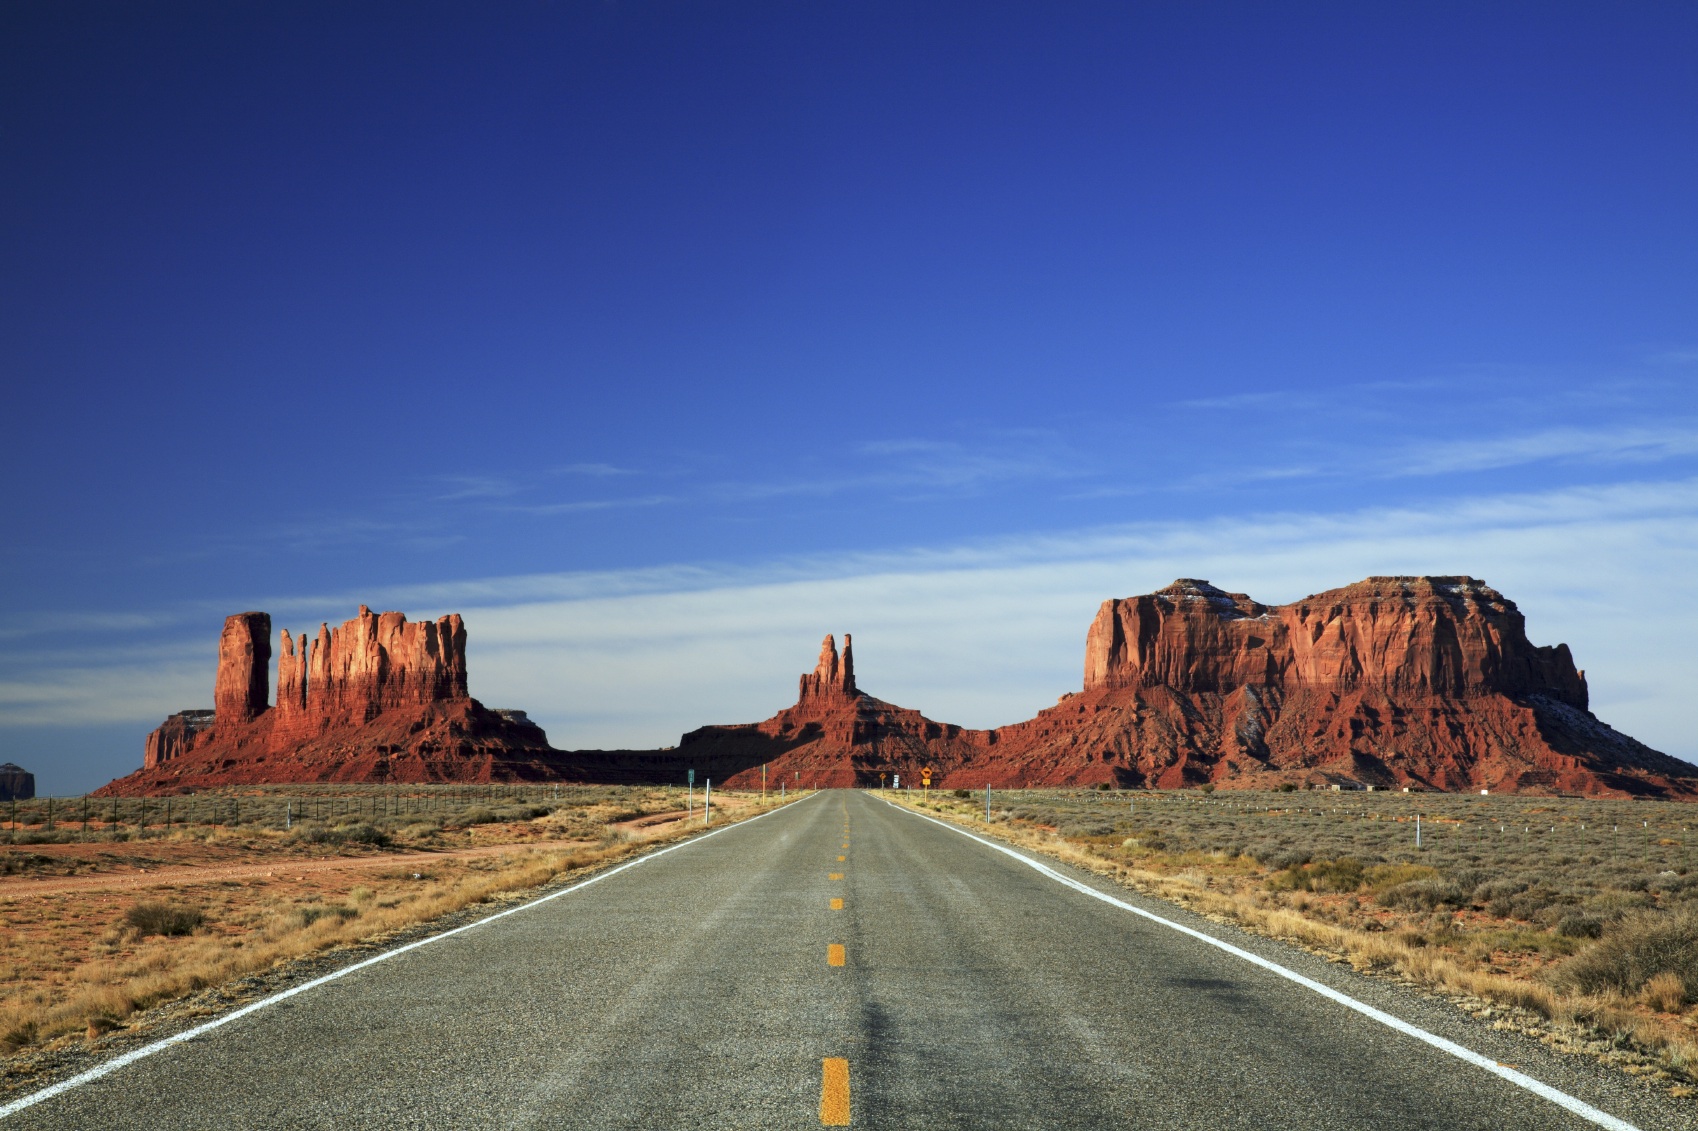 Arizona | to visit | Pinterest | Vacation destinations, Route 66 and ...